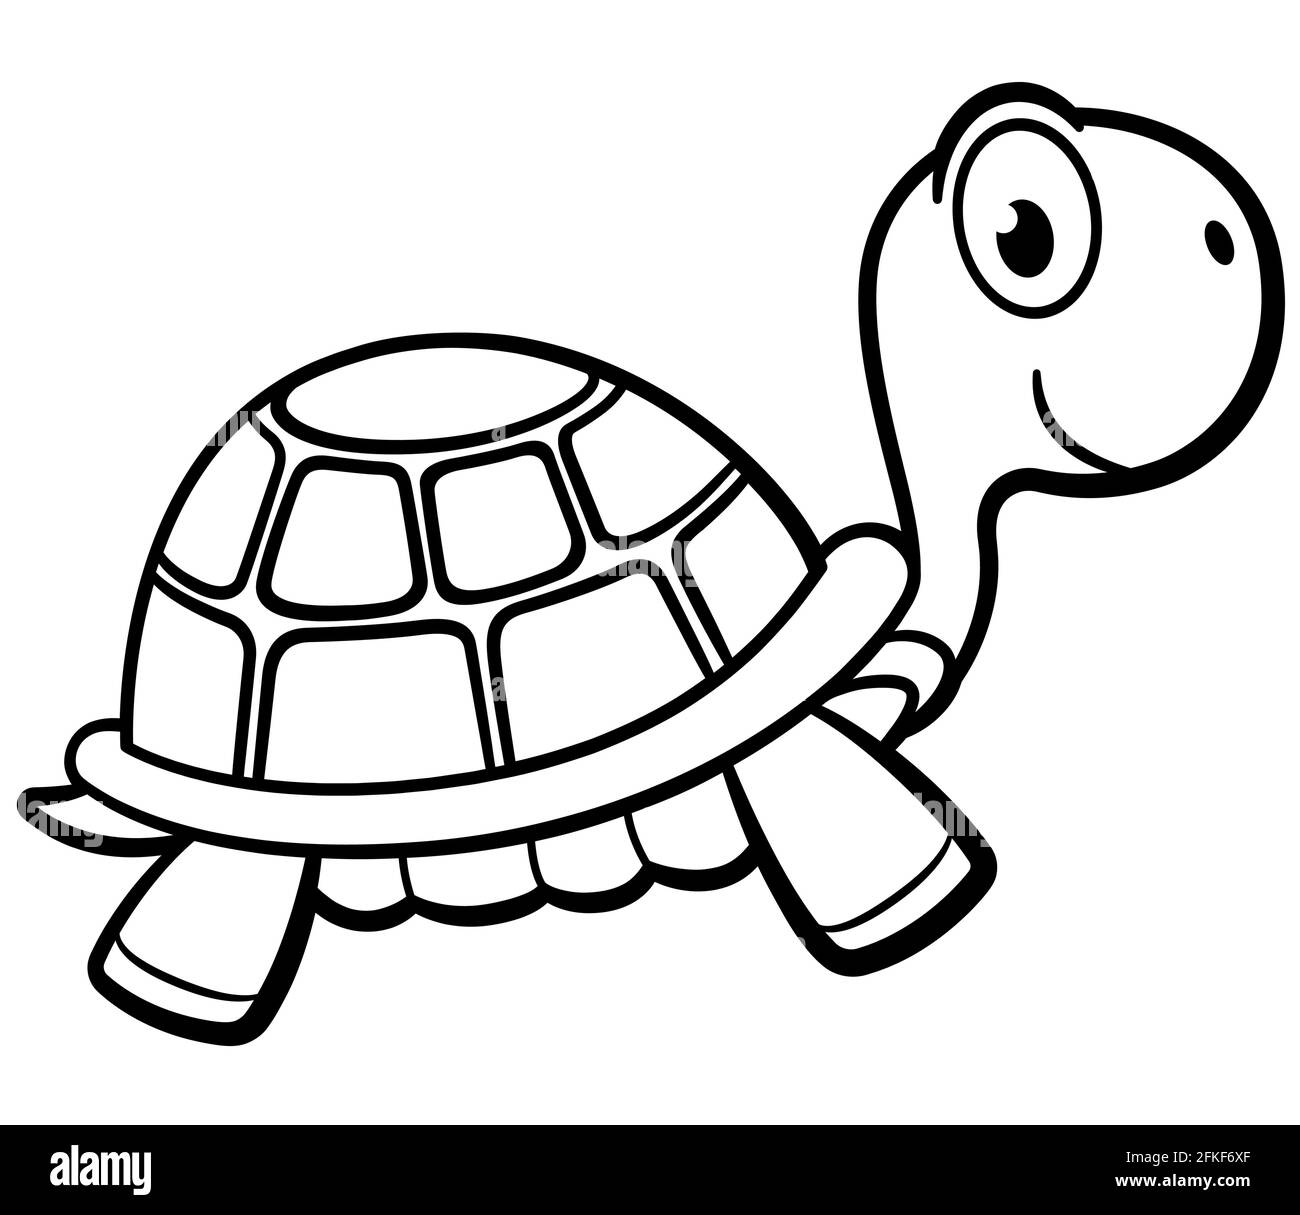 Vector illustration of outlined turtle cartoon design Stock Vector